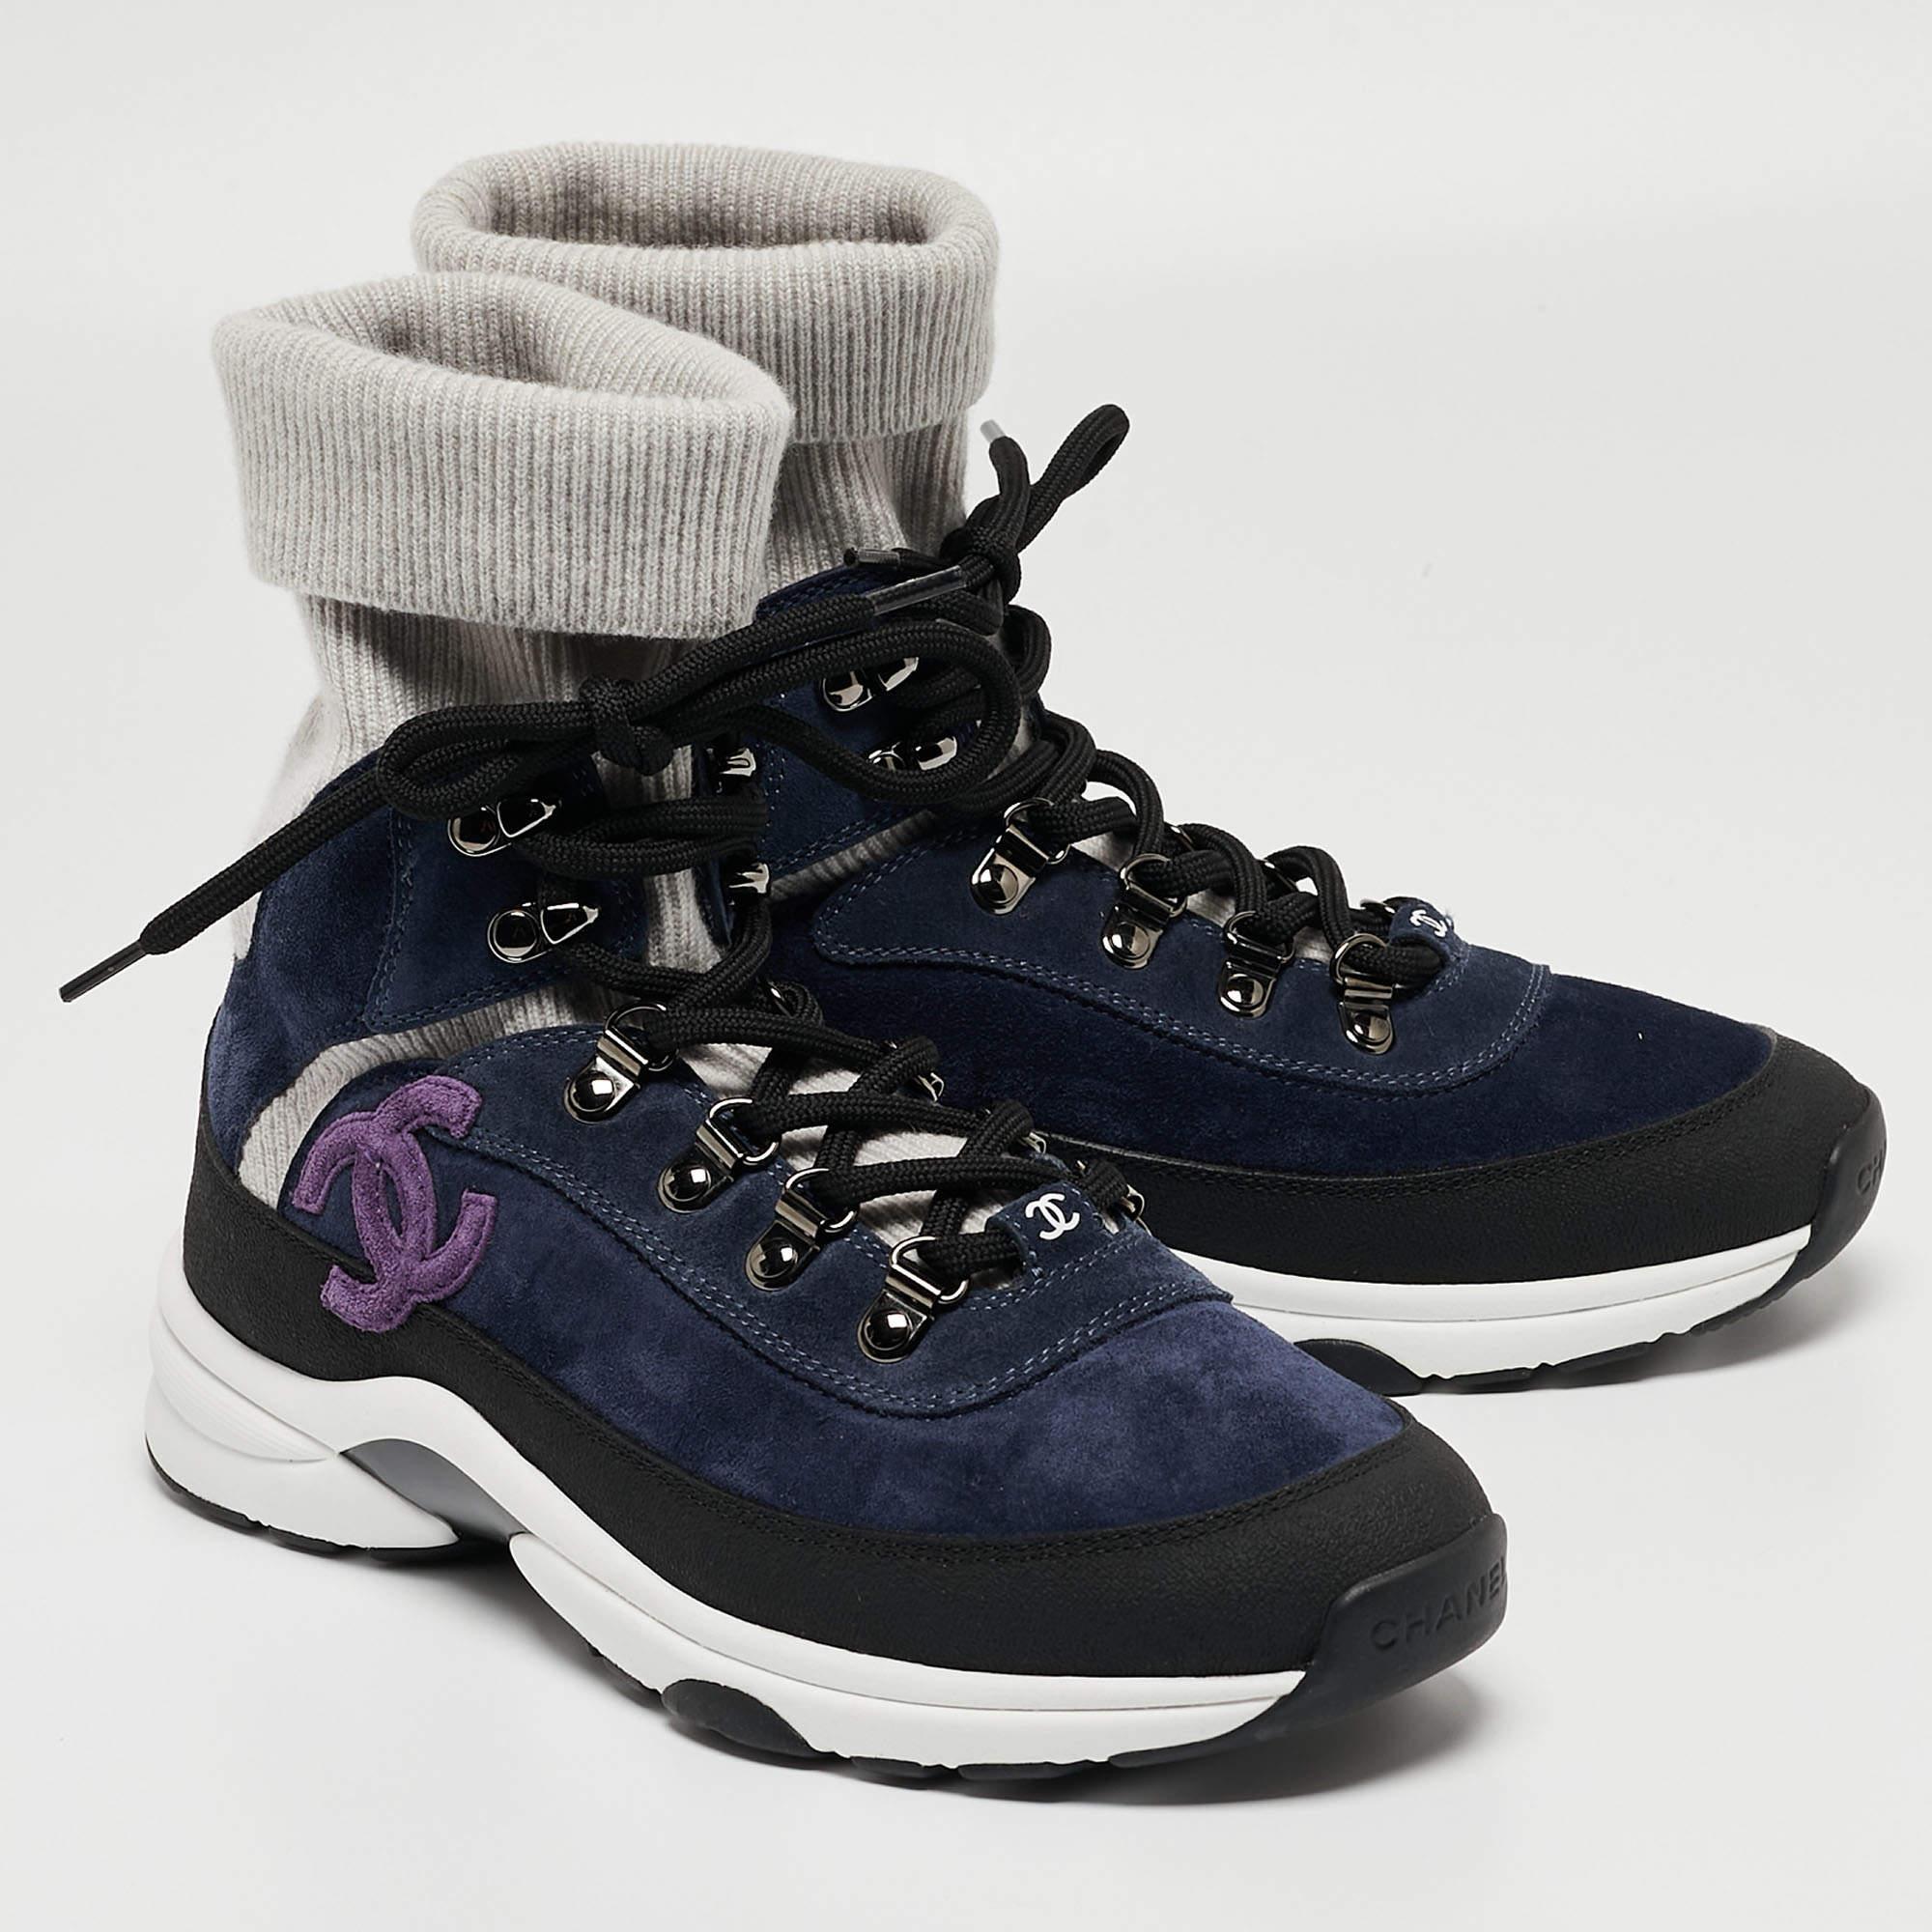 Chanel Navy Blue Suede and Leather Interlocking CC Logo Sock Sneakers Size 38 2